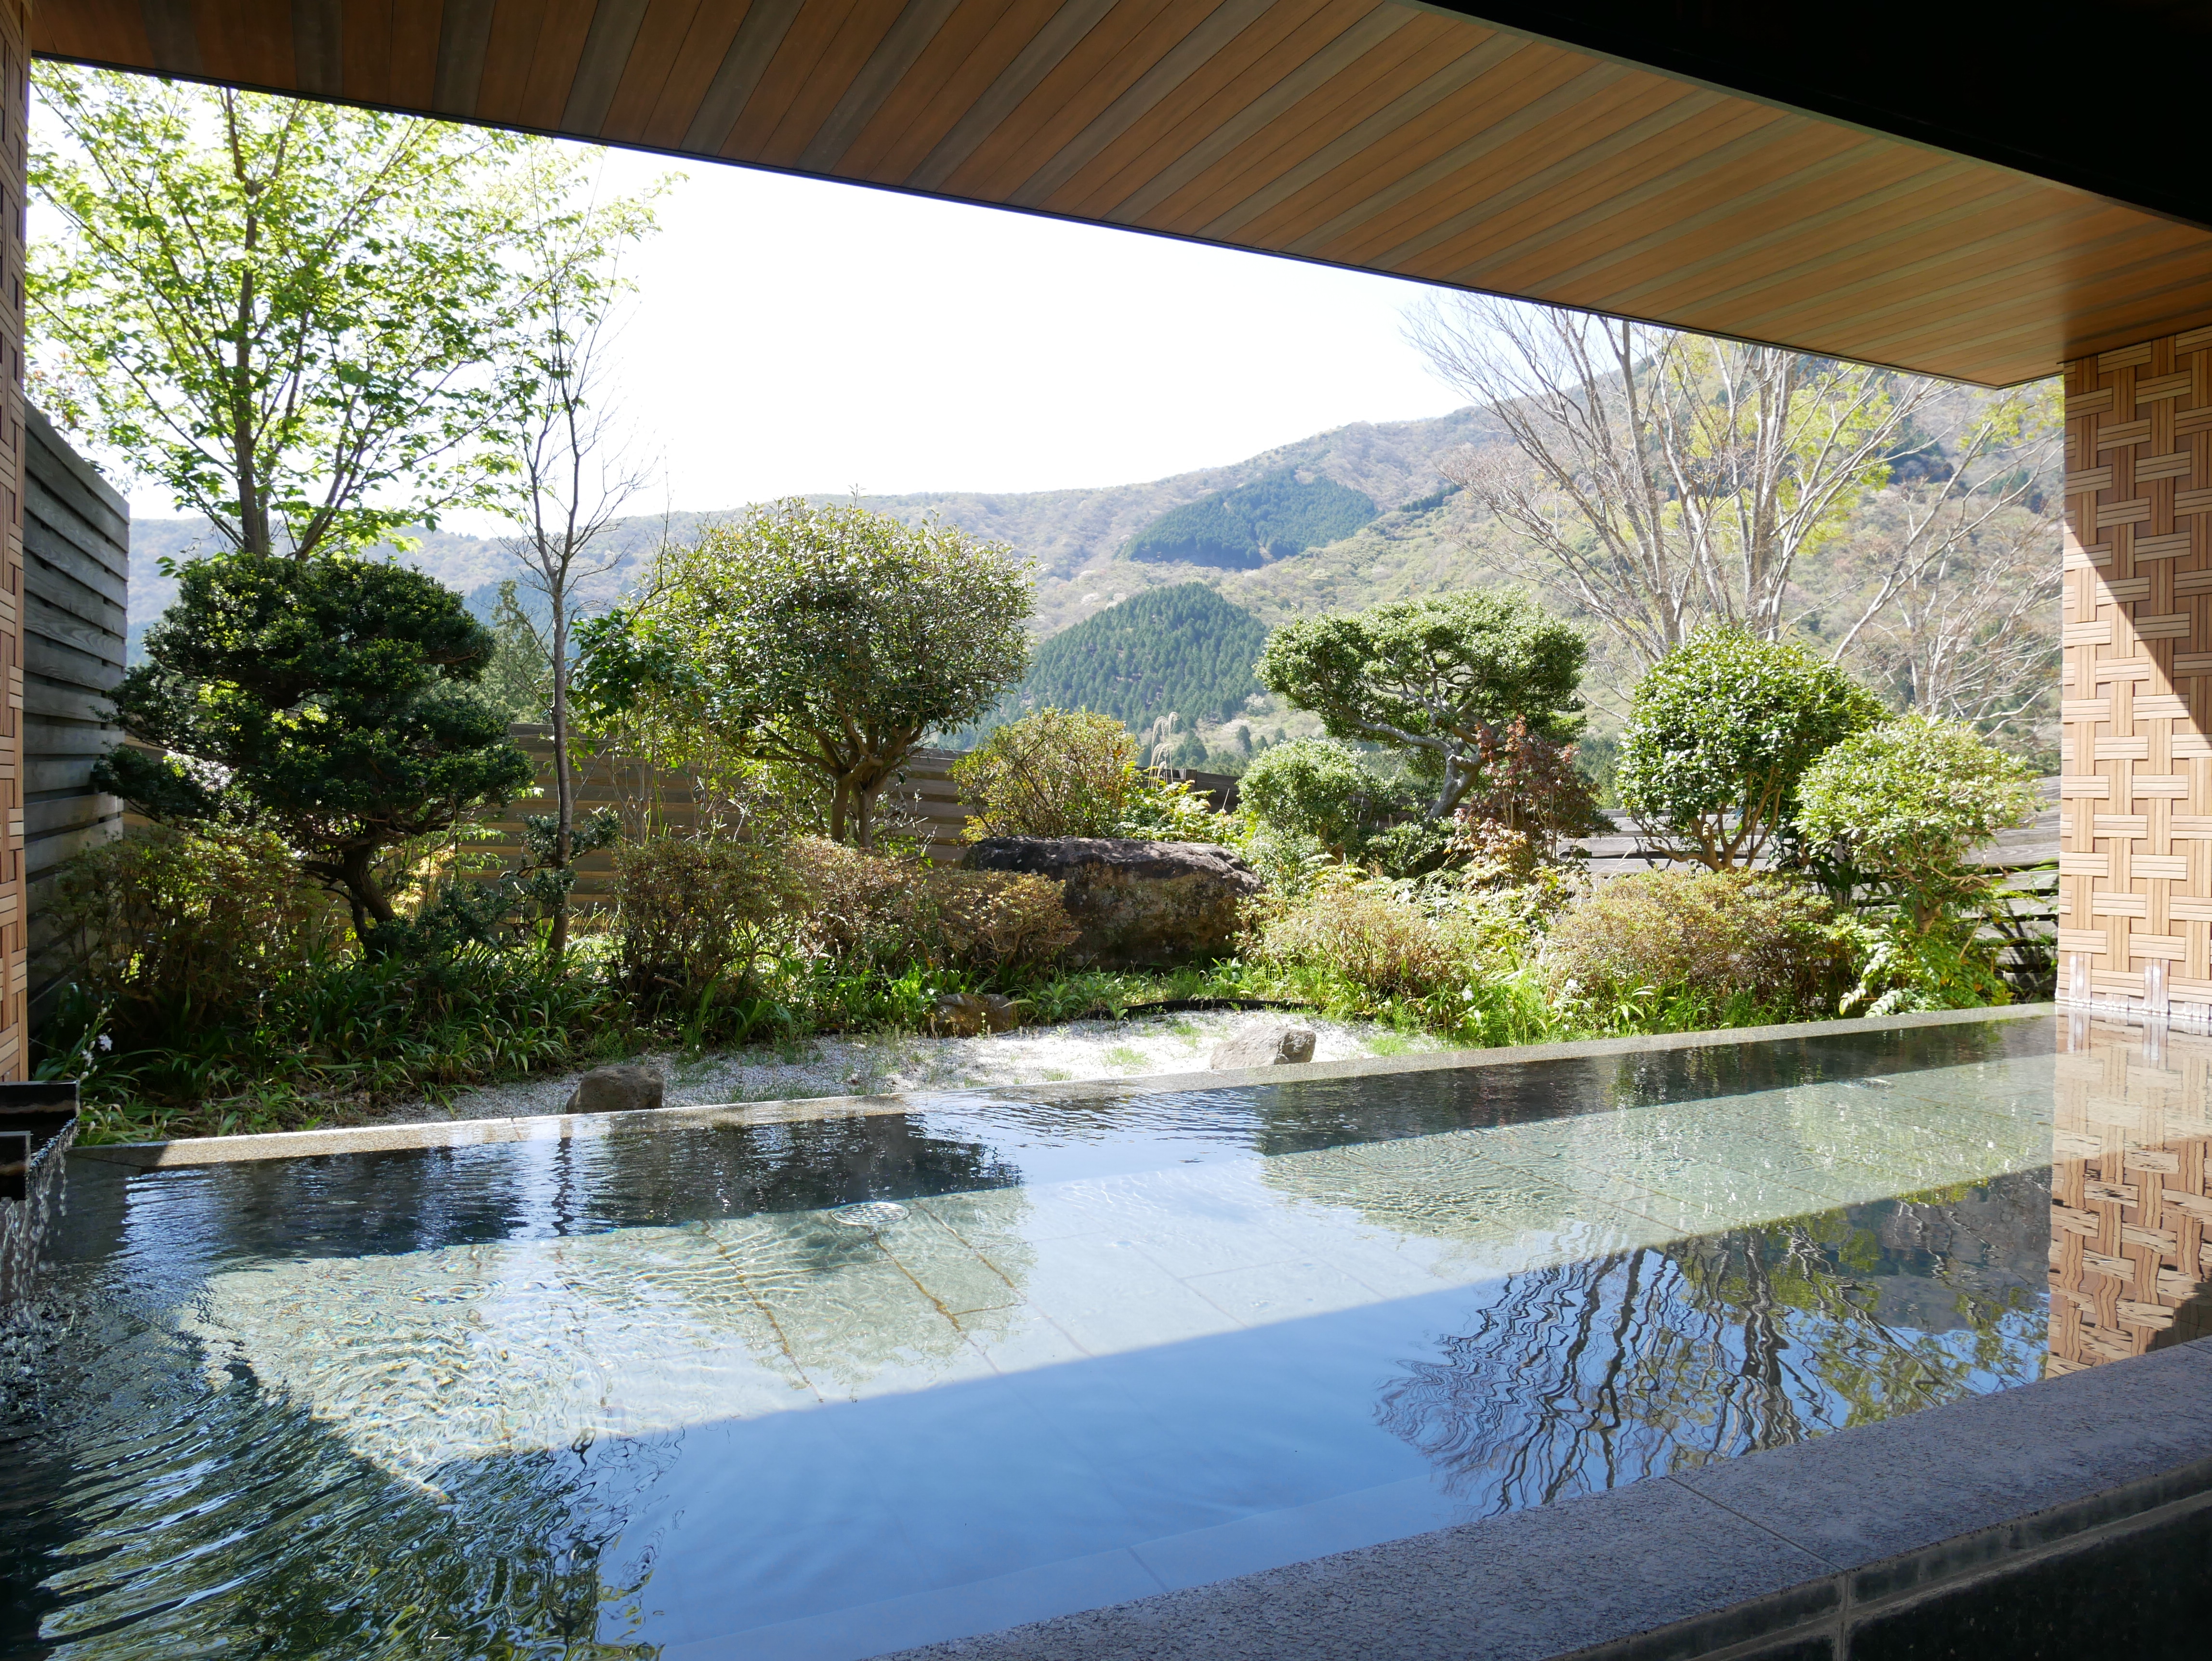 An open-air hot spring bath with a view of the Hakone Somma